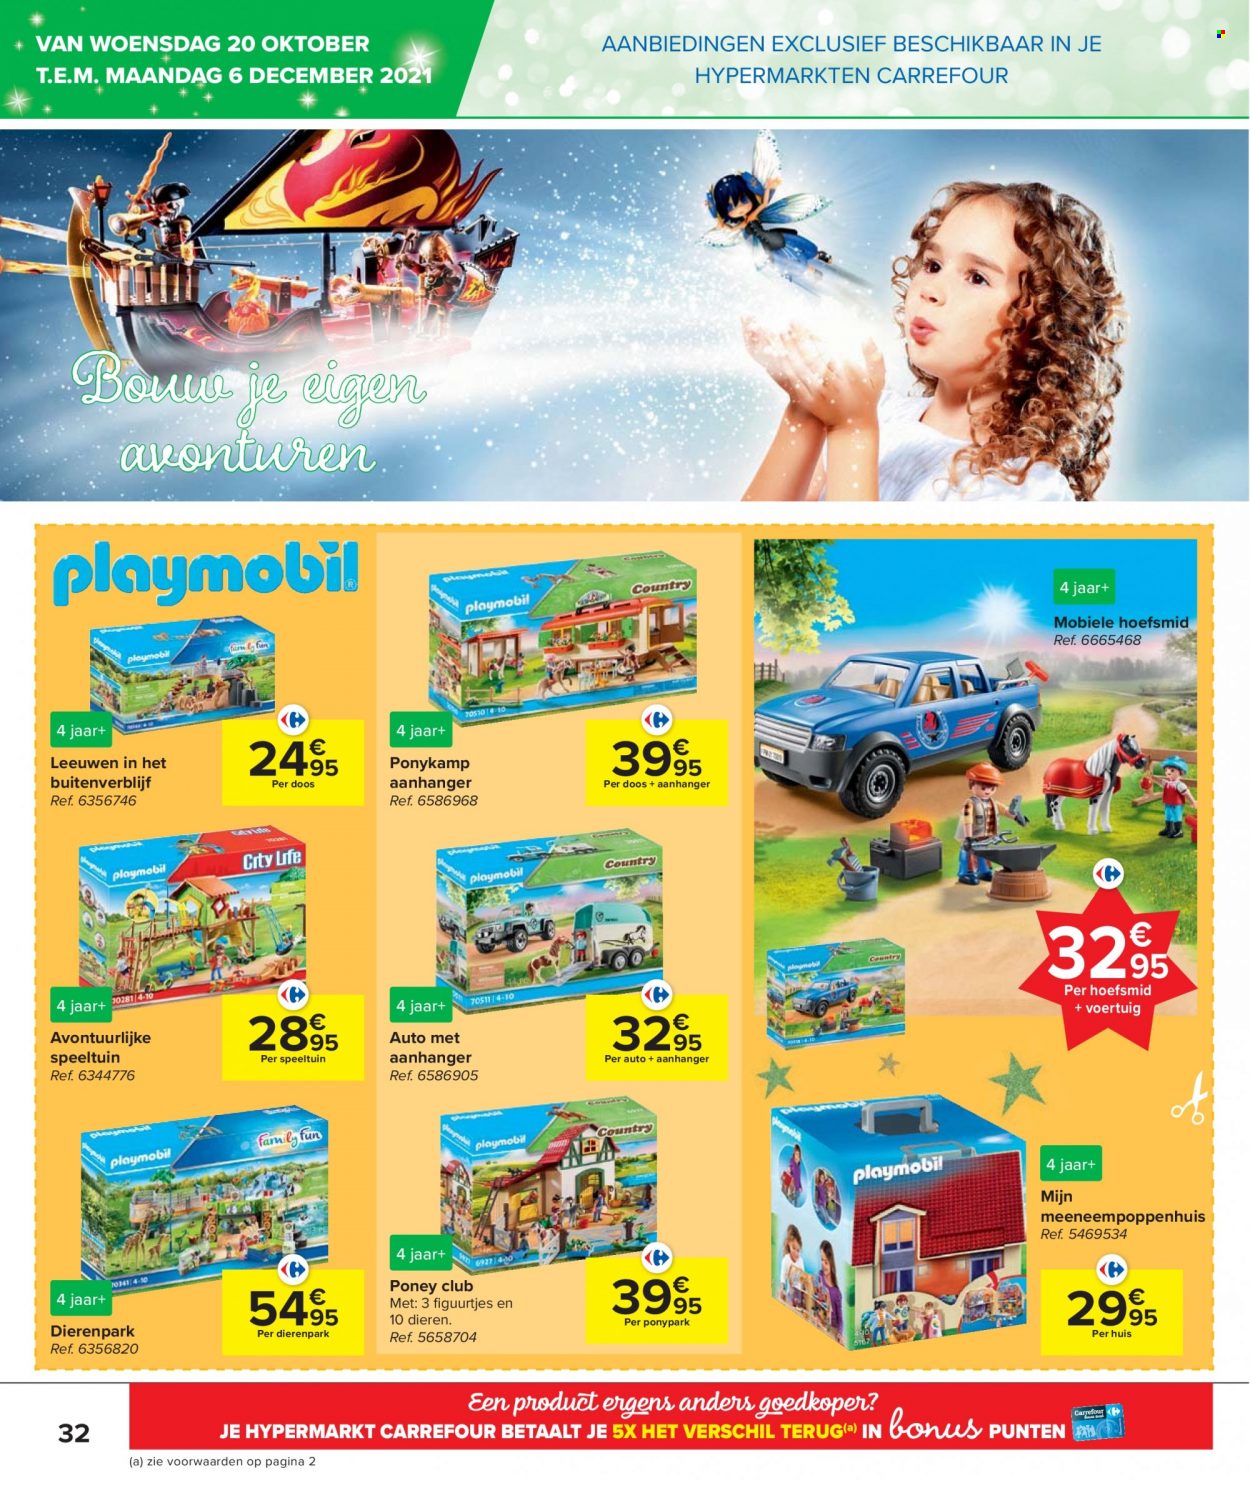 Catalogue Carrefour hypermarkt - 20.10.2021 - 6.12.2021. Page 32.